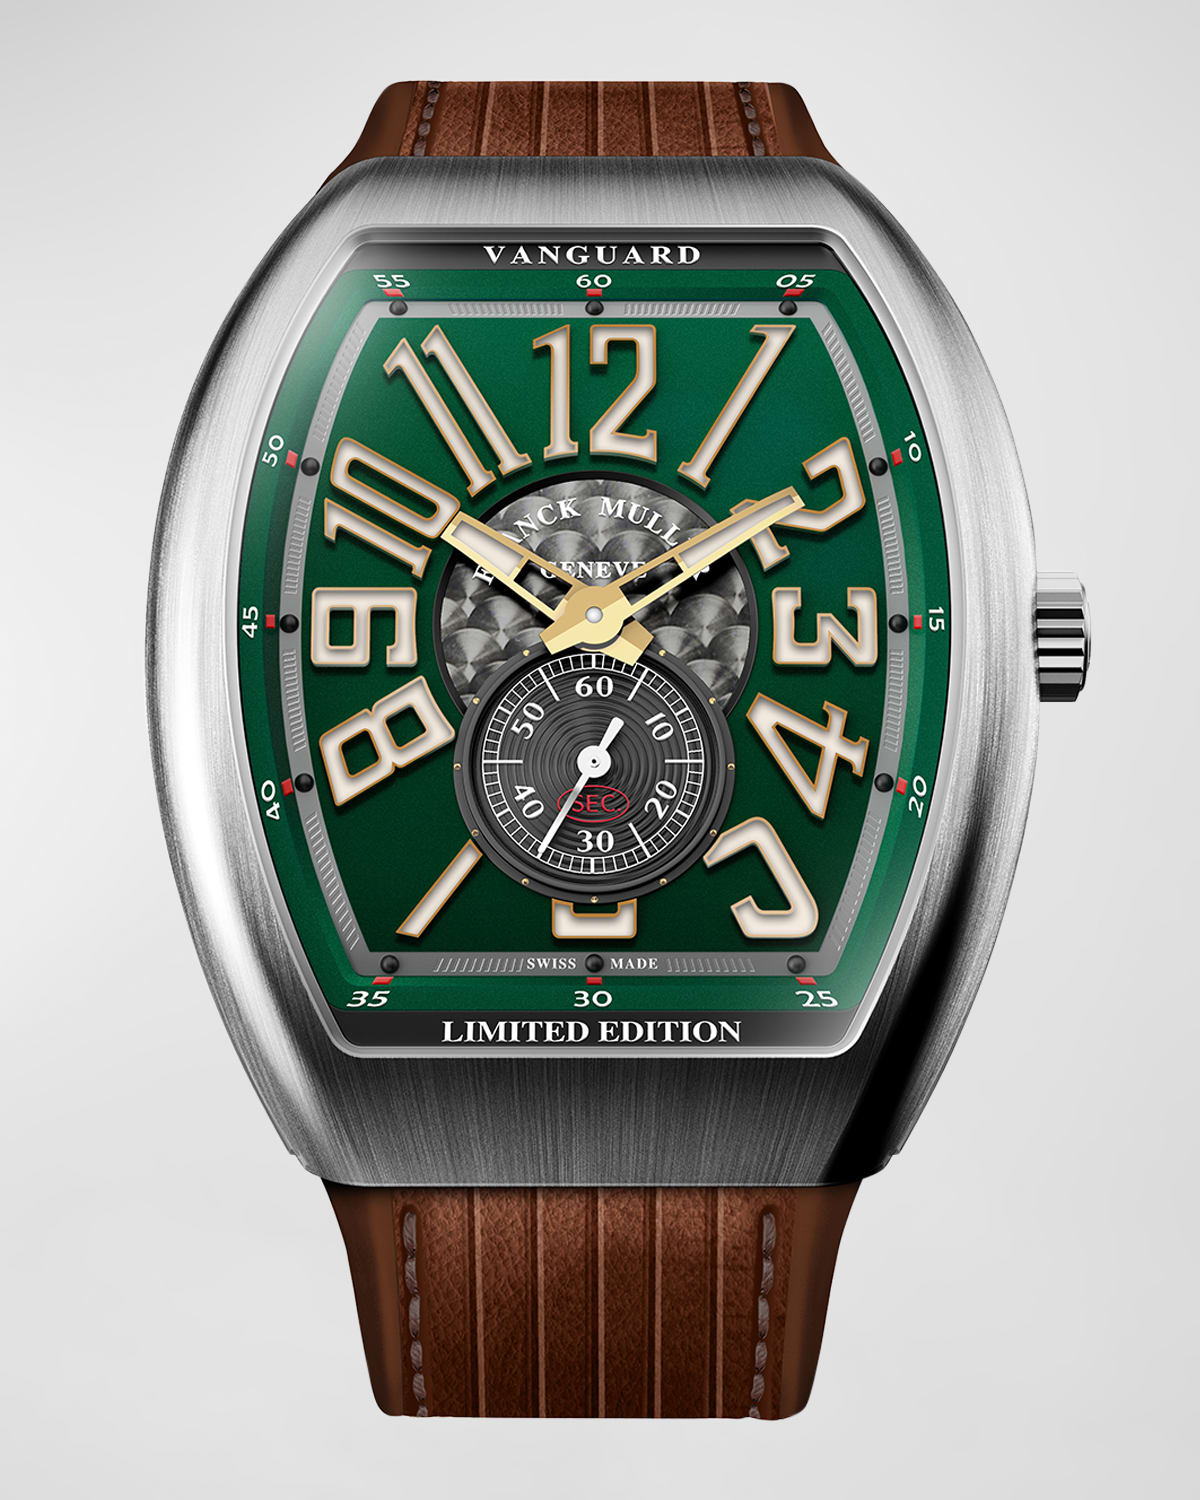 FRANCK MULLER MEN'S AUTOMATIC VANGUARD 1000 COLORADO GRAND LIMITED EDITION WATCH IN PINE GREEN